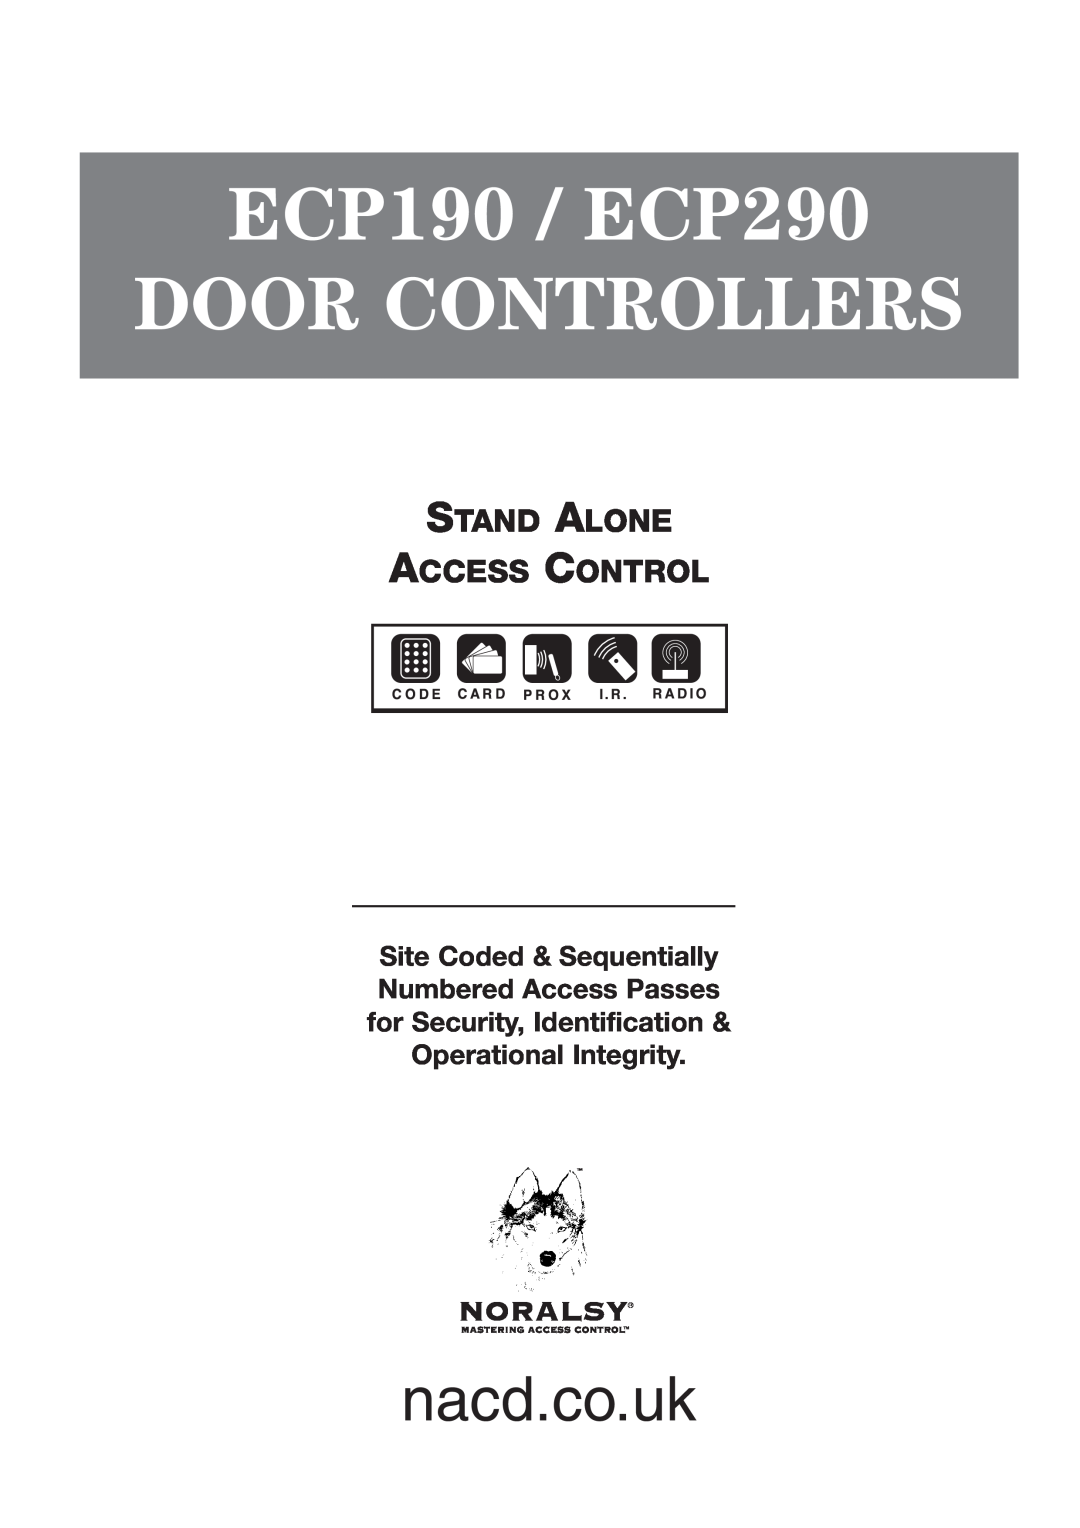 Pelco manual ECP190 / ECP290 DOOR CONTROLLERS, nacd.co.uk, Stand Alone Access Control 